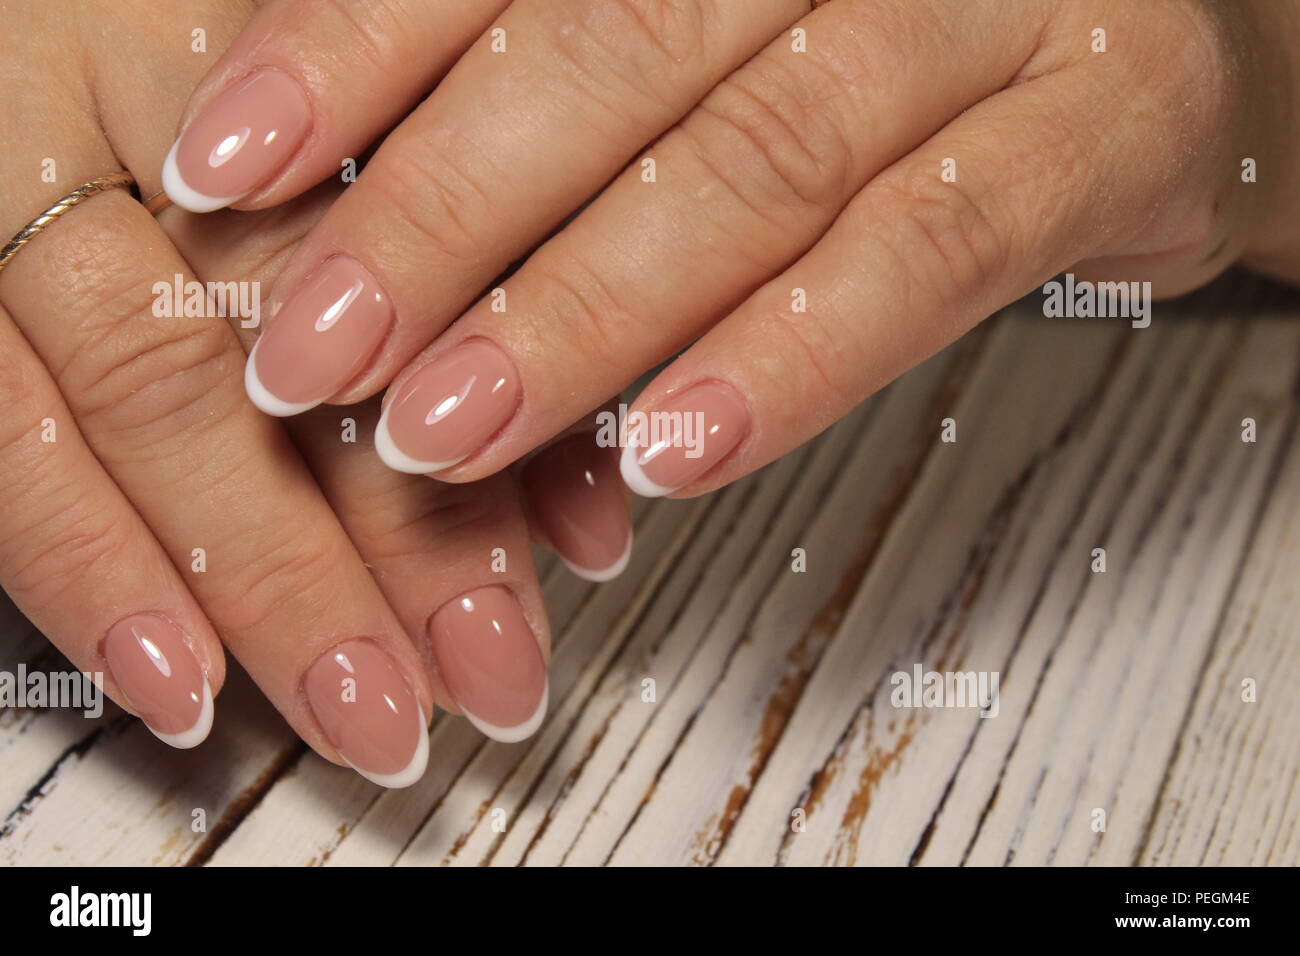 Forbrydelse Neuropati Salg Hands with beautiful manicure. Natural nails with gel polish Stock Photo -  Alamy